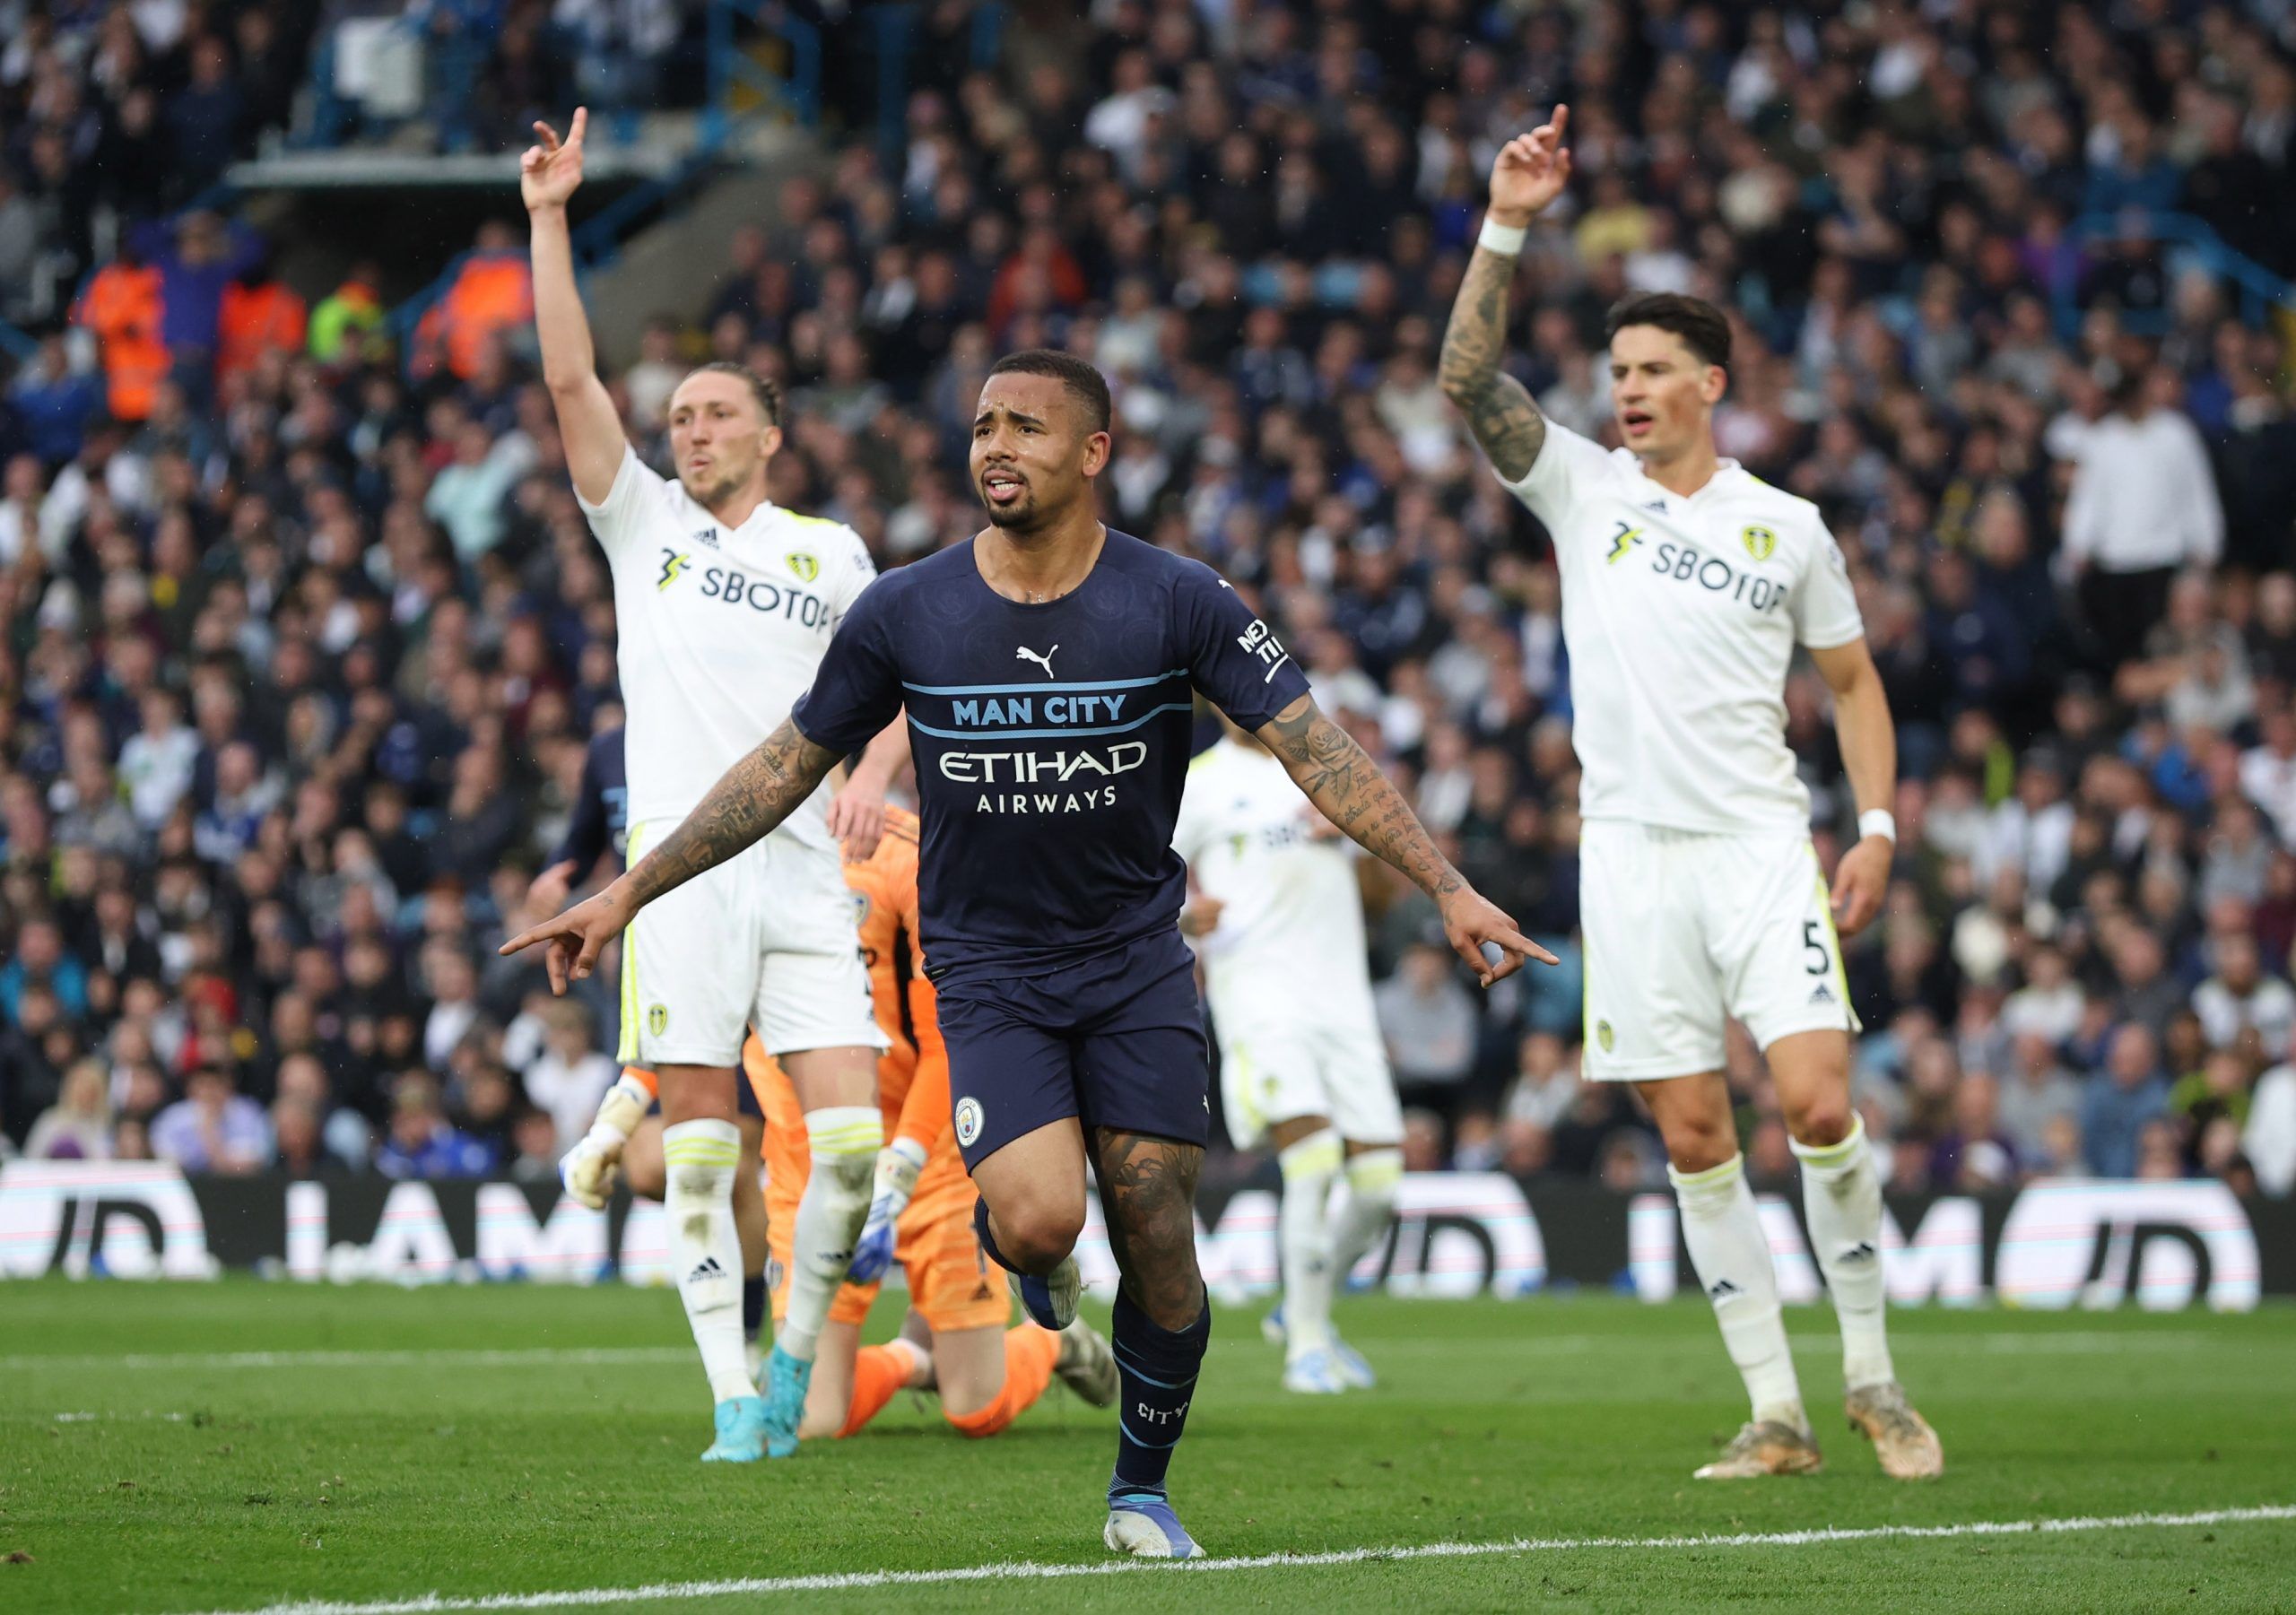 Soccer Football - Premier League - Leeds United v Manchester City - Elland Road, Leeds, Britain - April 30, 2022 Manchester City's Gabriel Jesus celebrates scoring their third goal REUTERS/Phil Noble EDITORIAL USE ONLY. No use with unauthorized audio, video, data, fixture lists, club/league logos or 'live' services. Online in-match use limited to 75 images, no video emulation. No use in betting, games or single club /league/player publications.  Please contact your account representative for fur